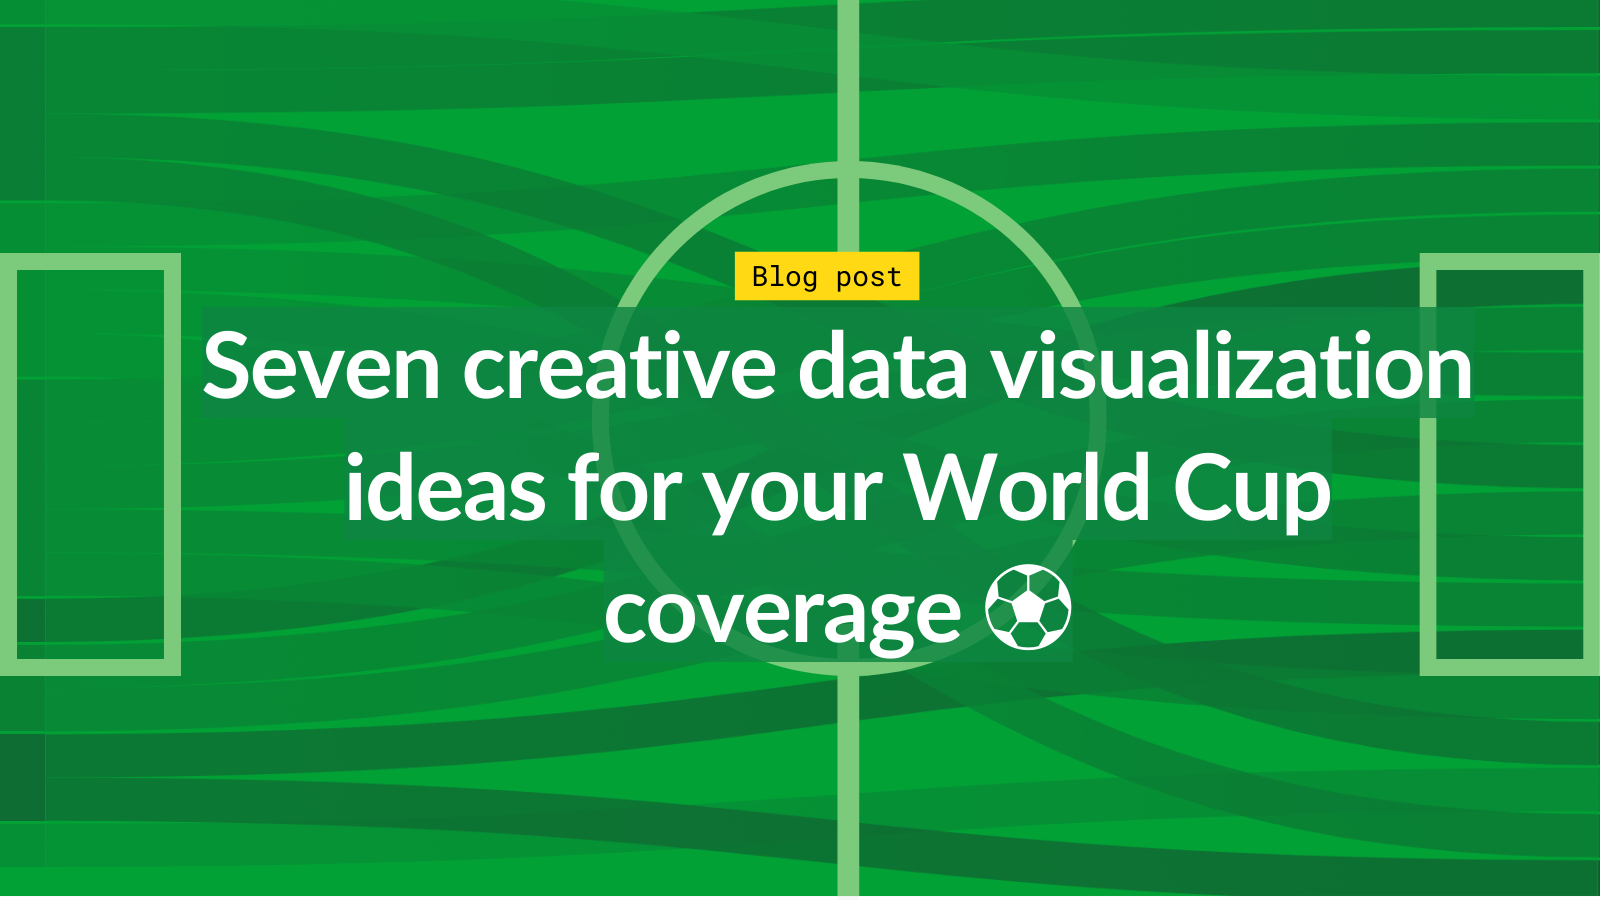 Seven creative data visualization ideas for your World Cup coverage ⚽ The Flourish blog Flourish Data Visualization and Storytelling